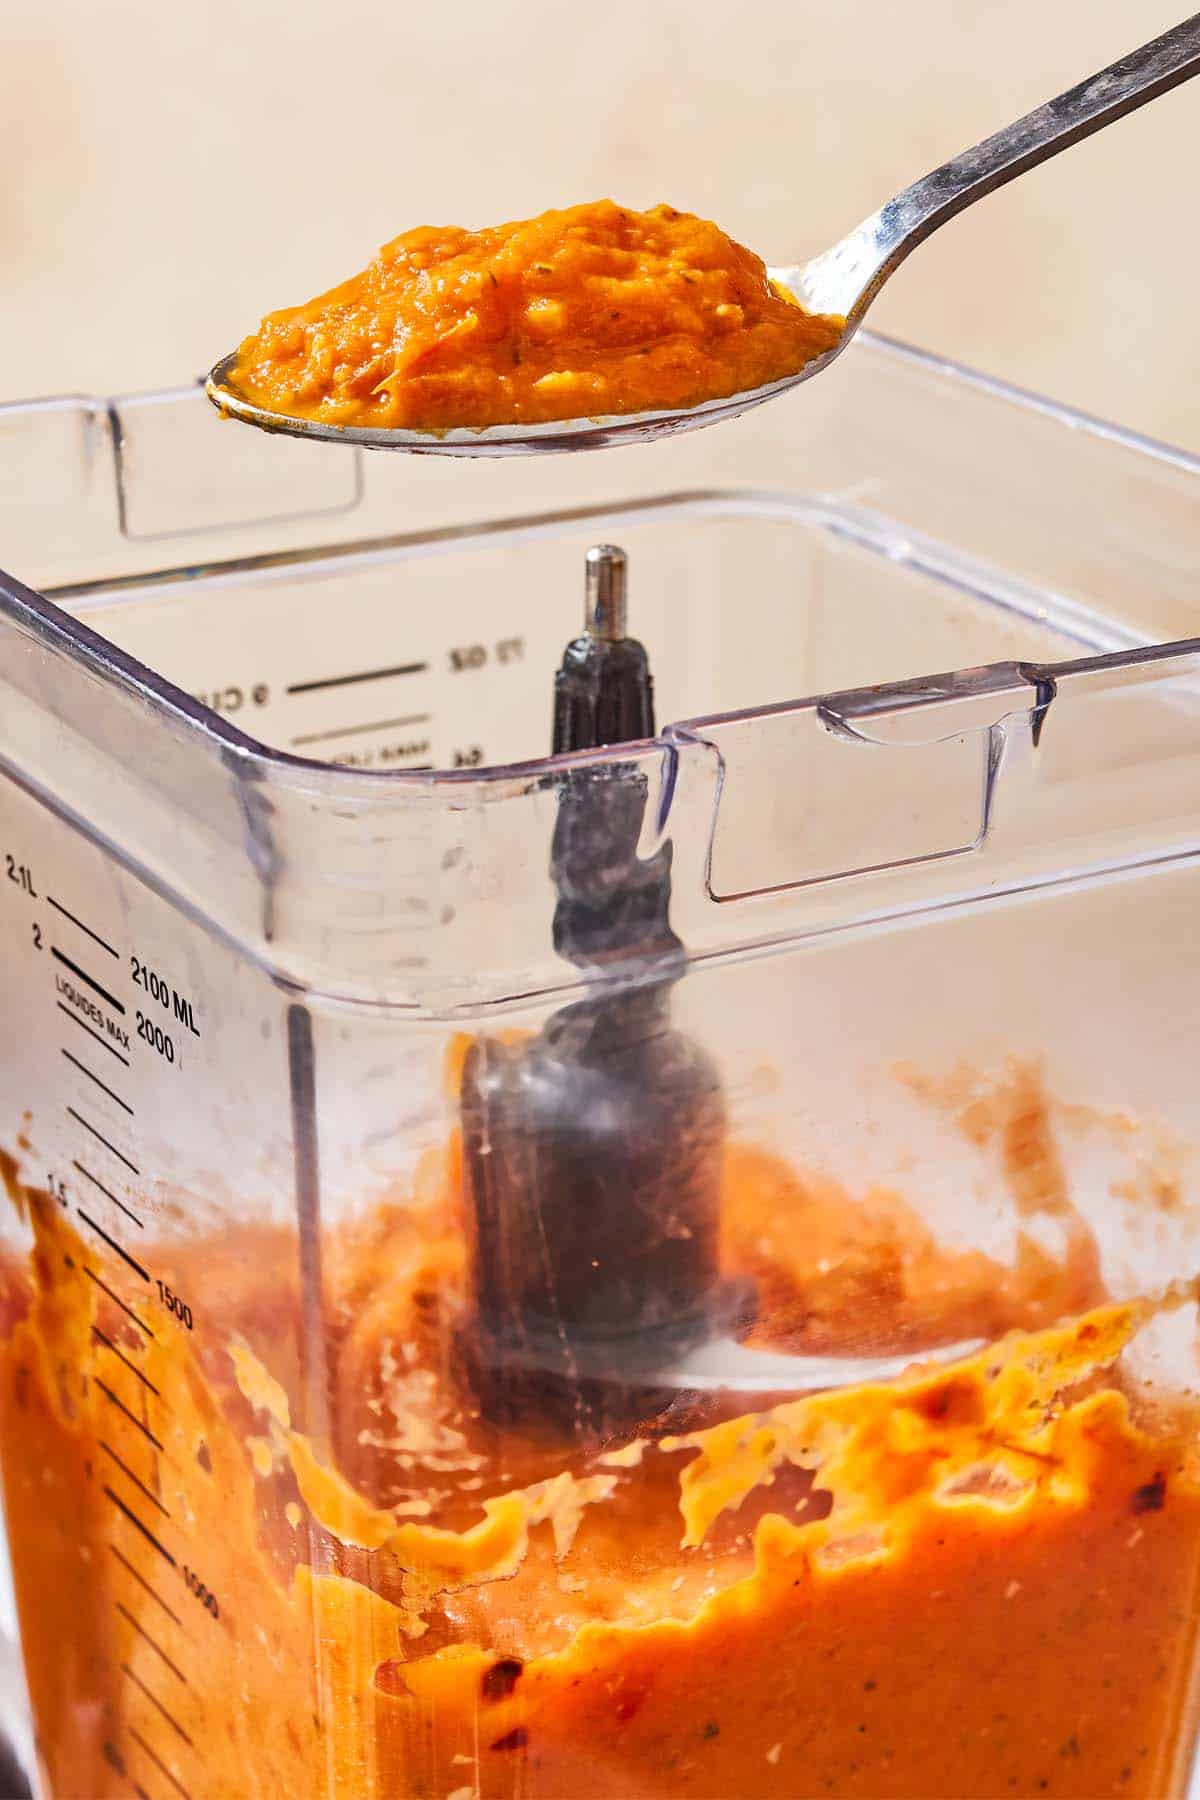 A spoonful of the roasted tomato sauce being lifted out of a blender.